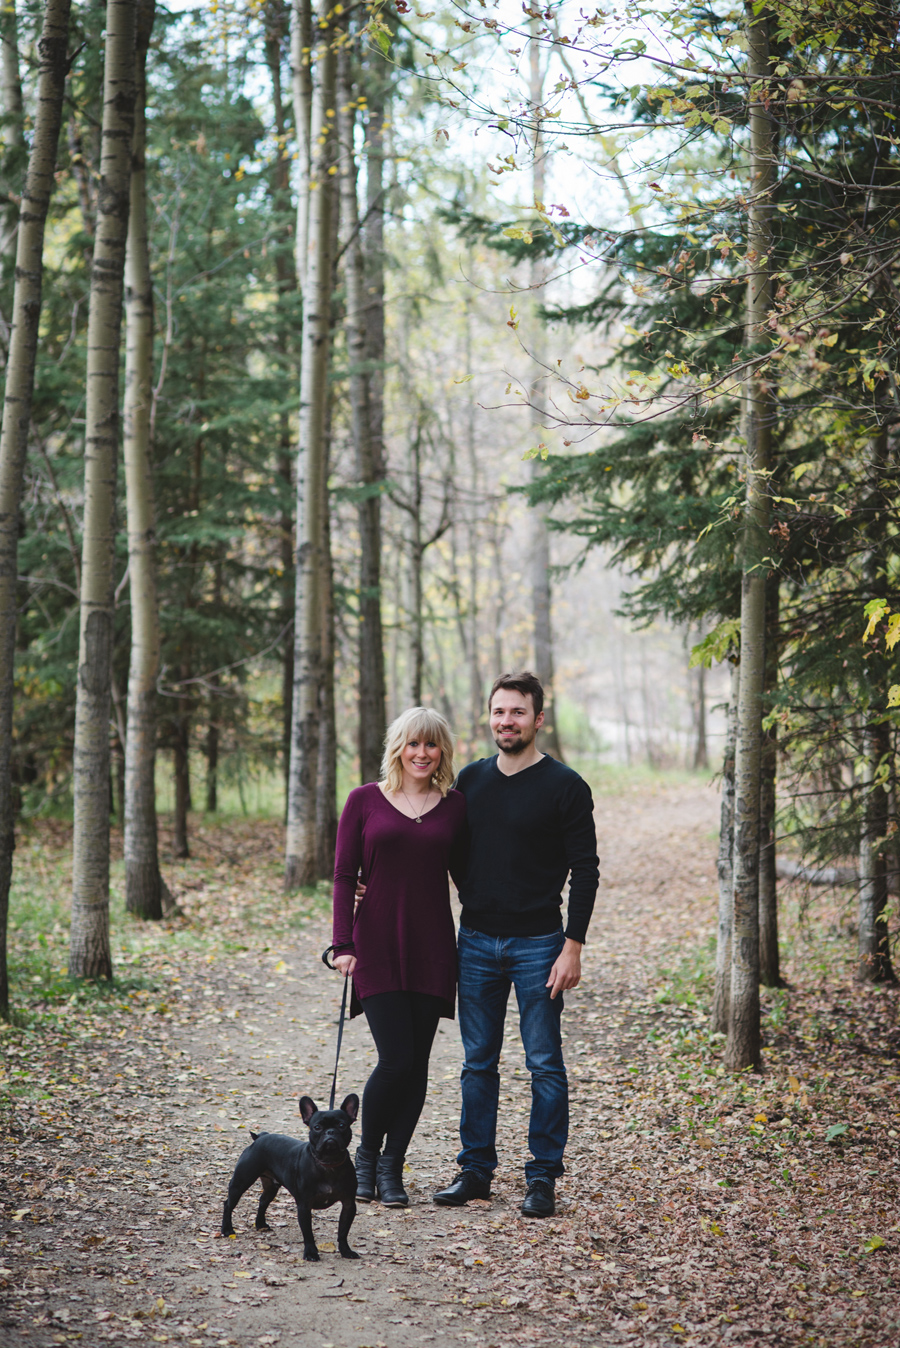 bbcollective_yeg_2016_robynandmichael_engagement_photography001.jpg